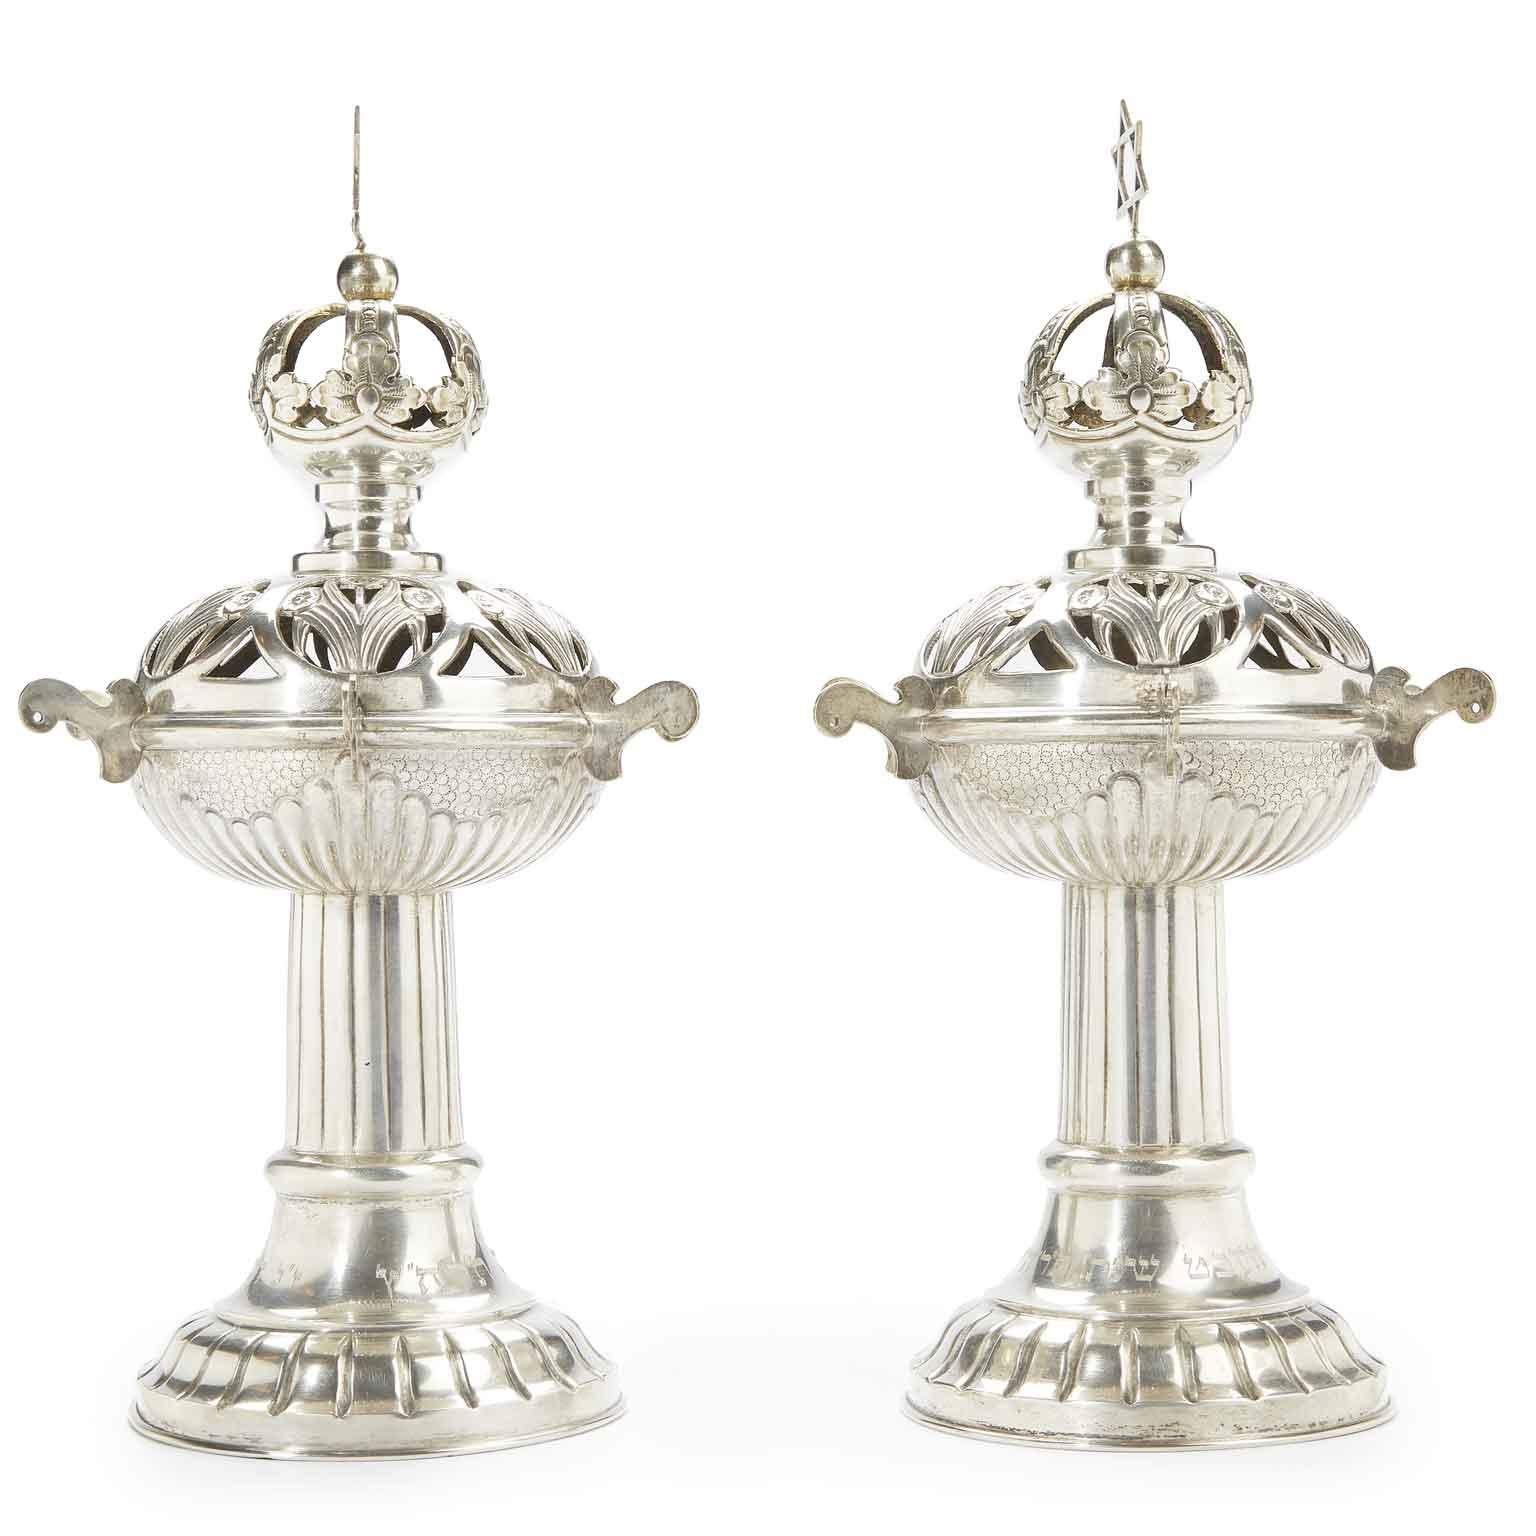 From Czech Republica pair of silver Torah finials Rimonim, the spherical bodies pierced and repoussé with foliage and bouches of flowers décor, surmounted by star of David finials. Circular ribbed pedestal bases with Hebrew dedication around foot